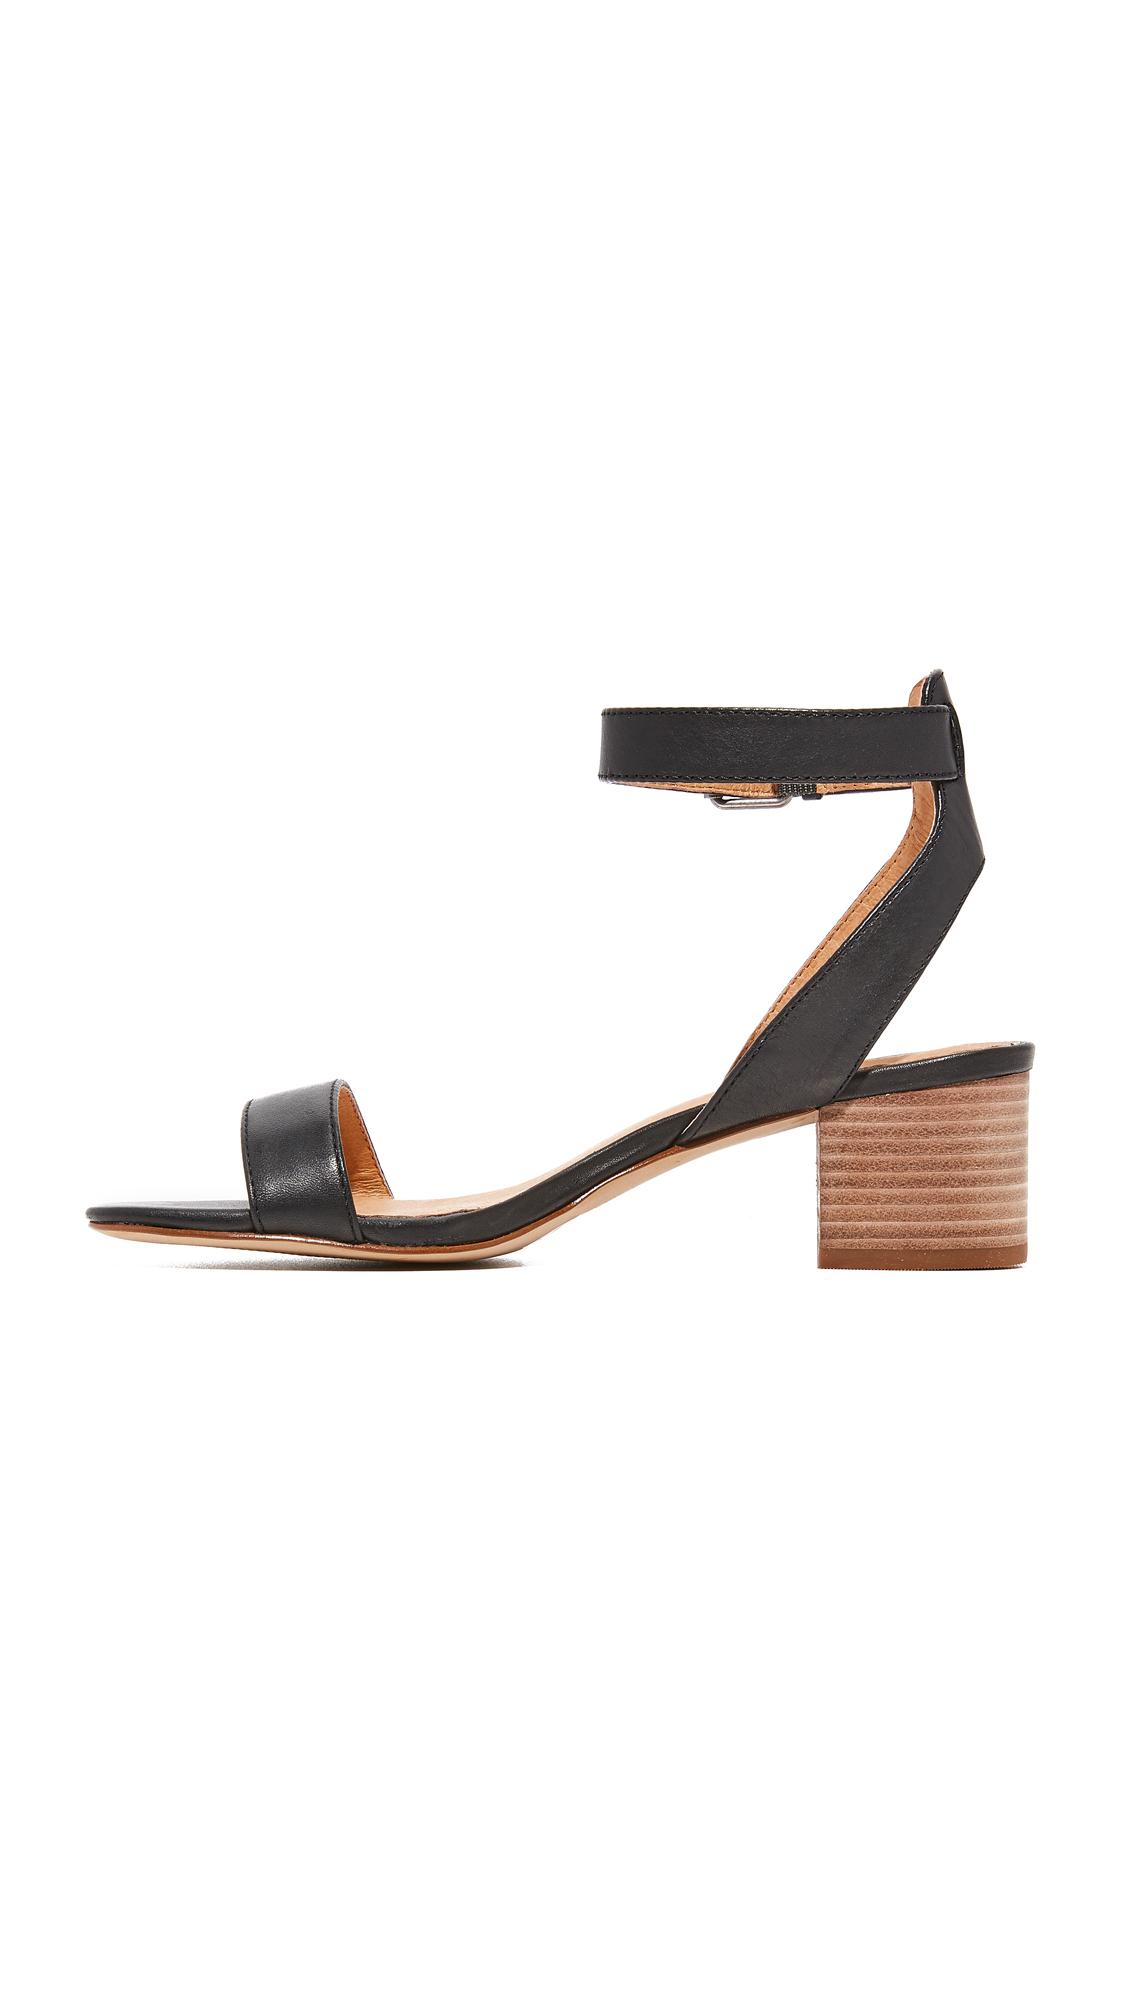 Madewell Leather Alice Sandals in Black 